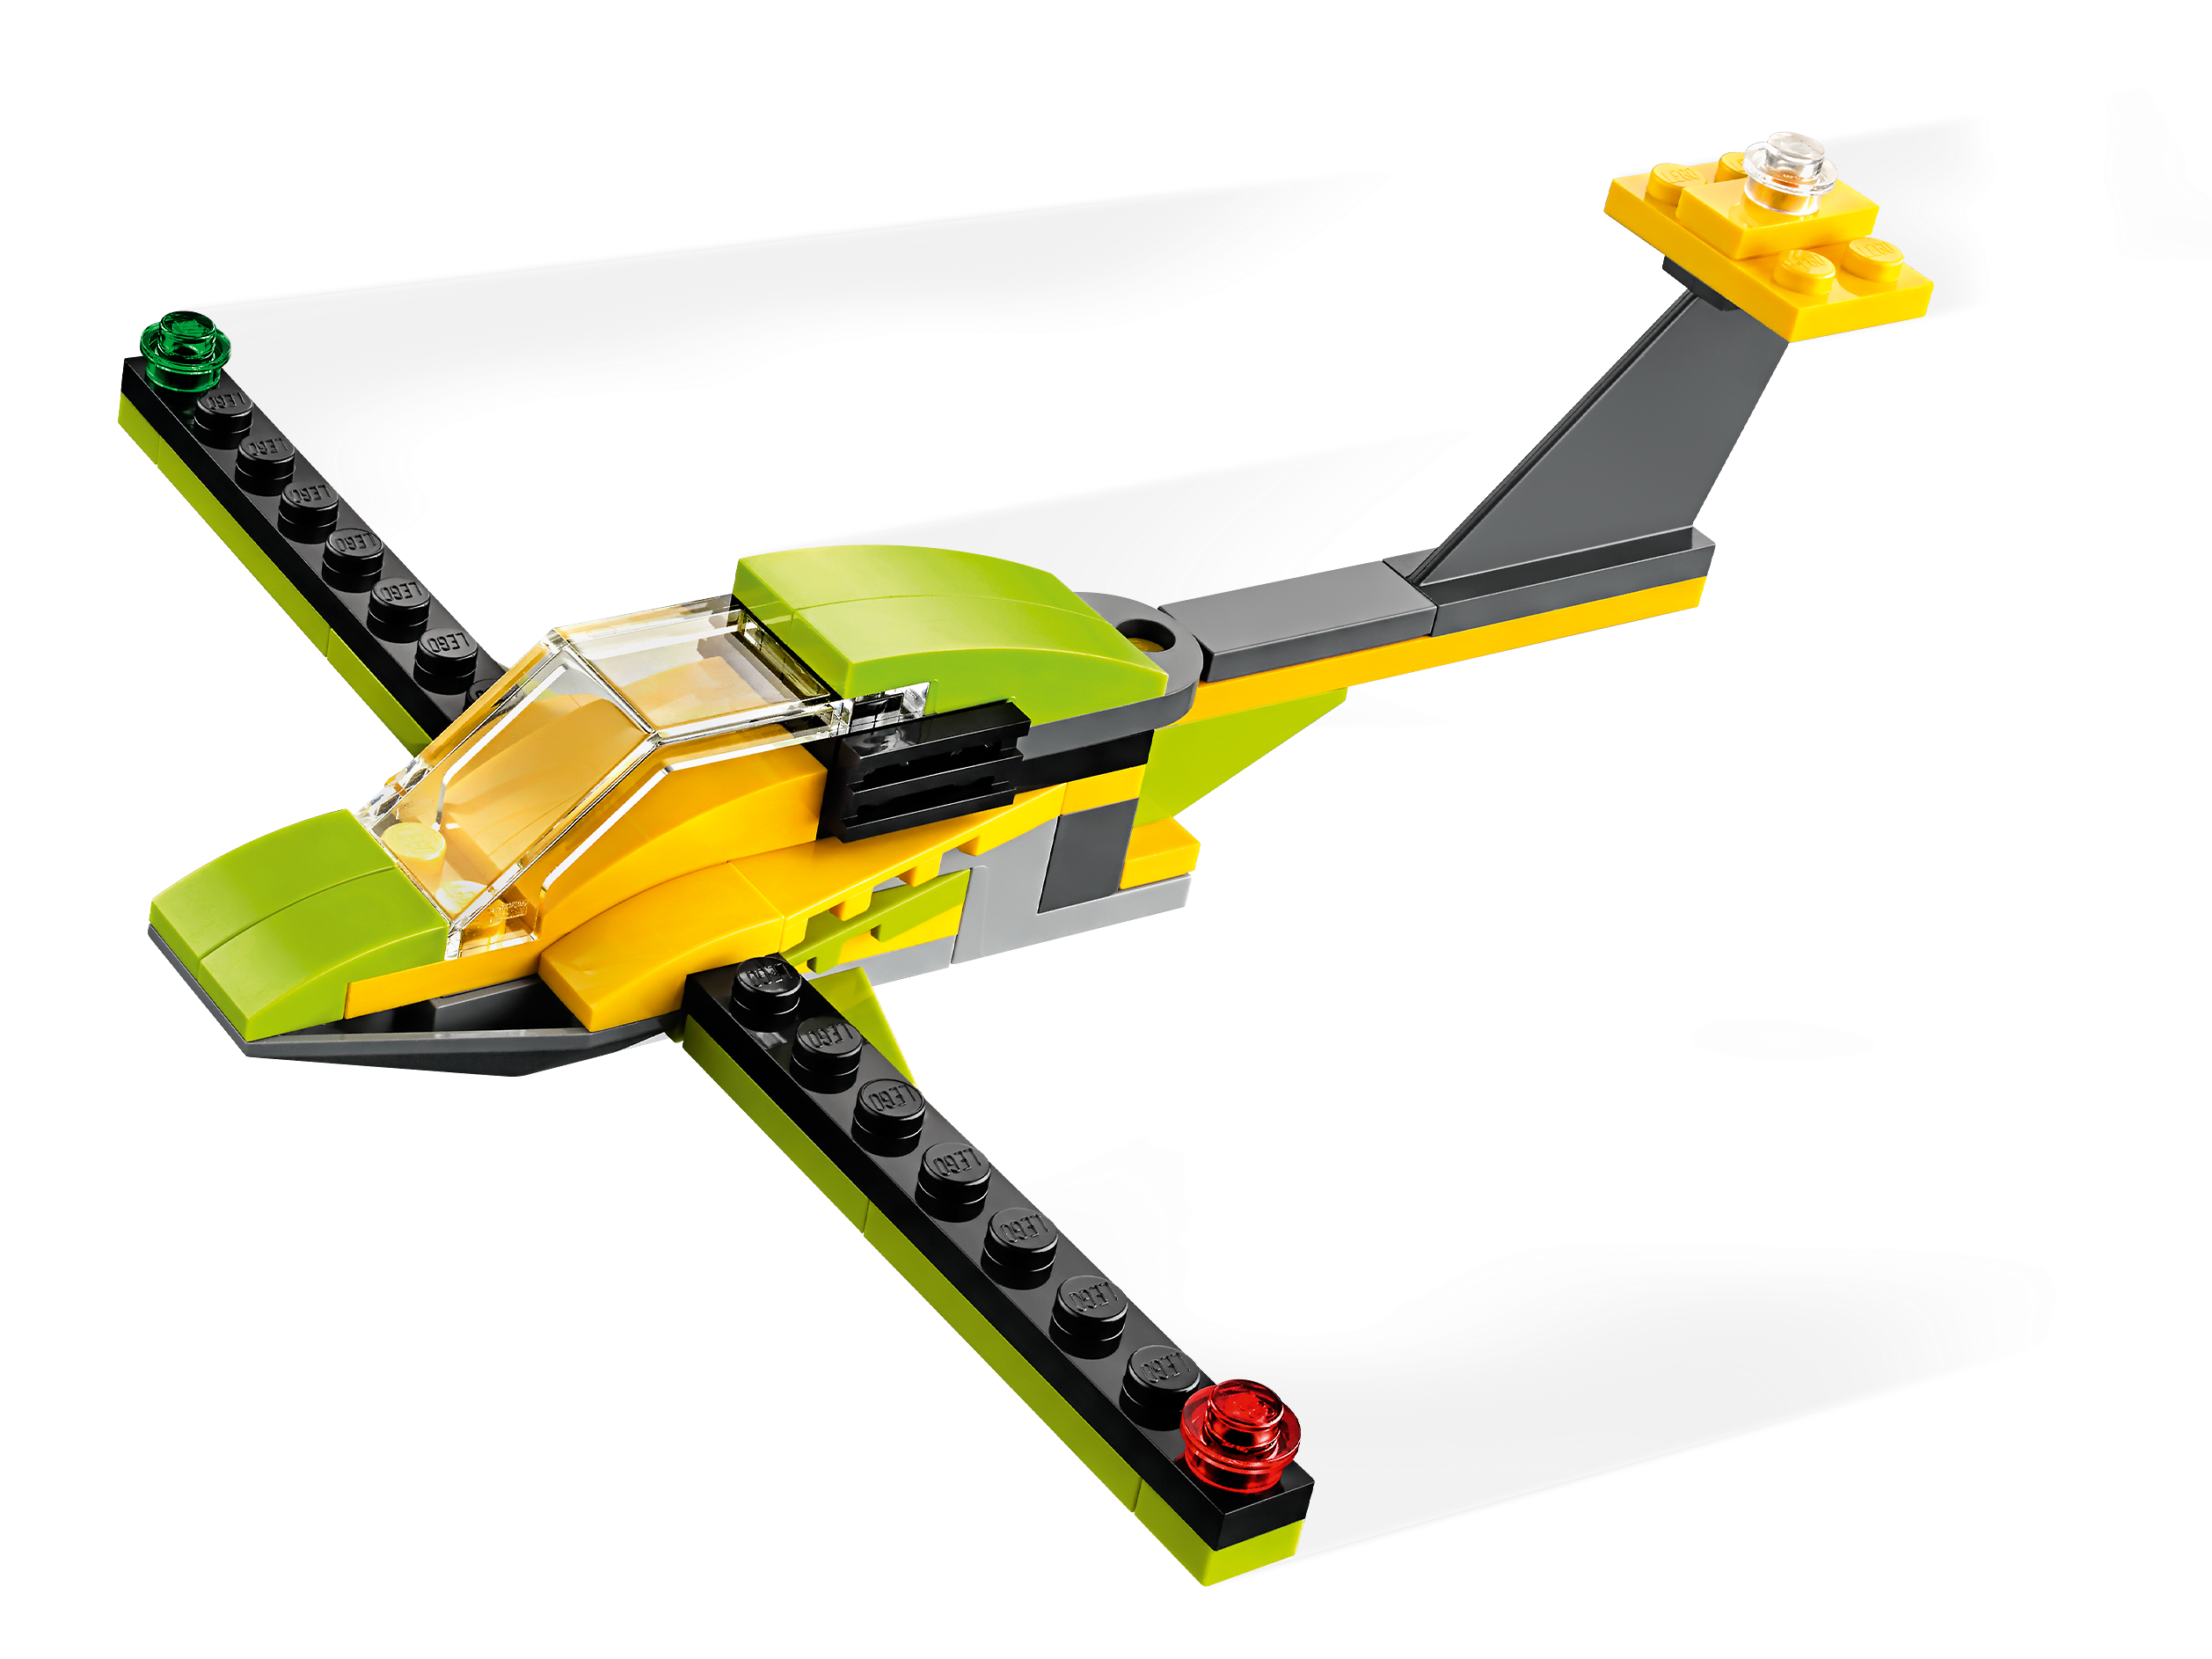 Helicopter Adventure 31092 | Creator 3-in-1 | Buy online at the